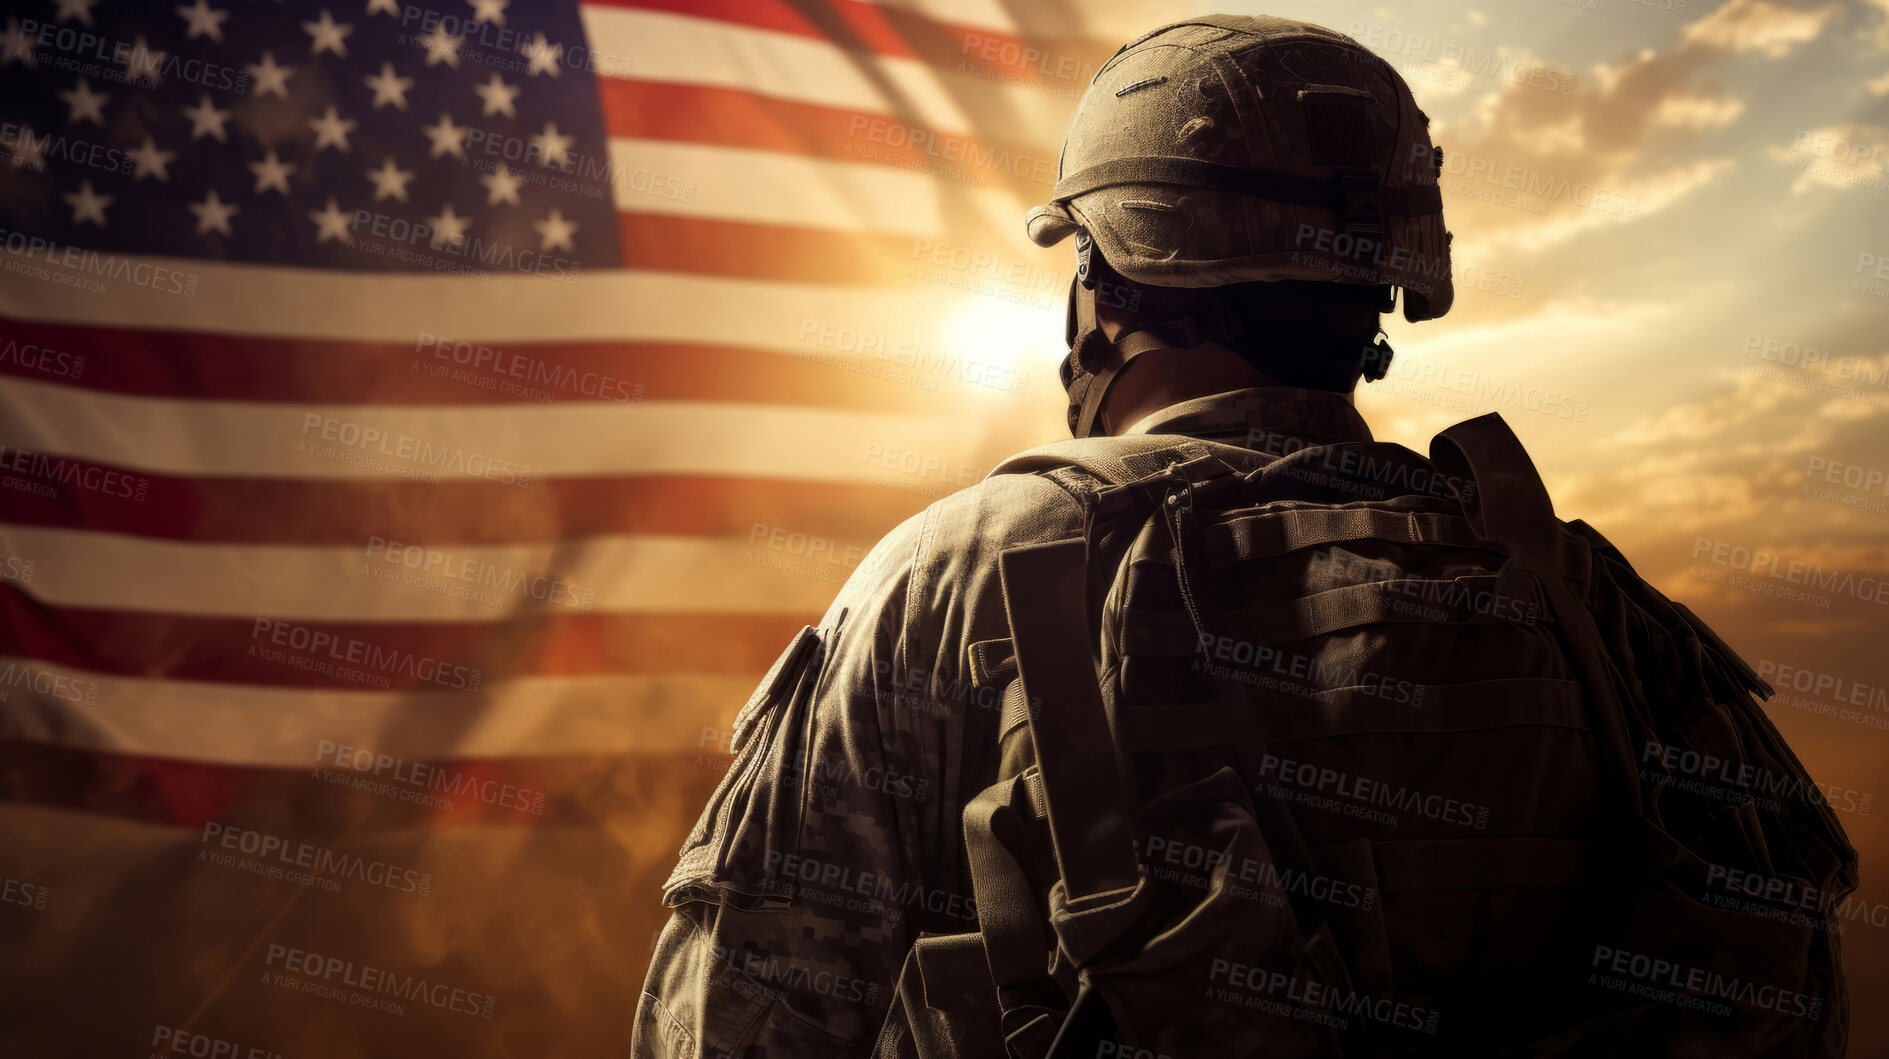 Buy stock photo Silhouette of soldier standing in front of fading American flag waving in the sunset. Shot from behind. Patriotic duty and pride.